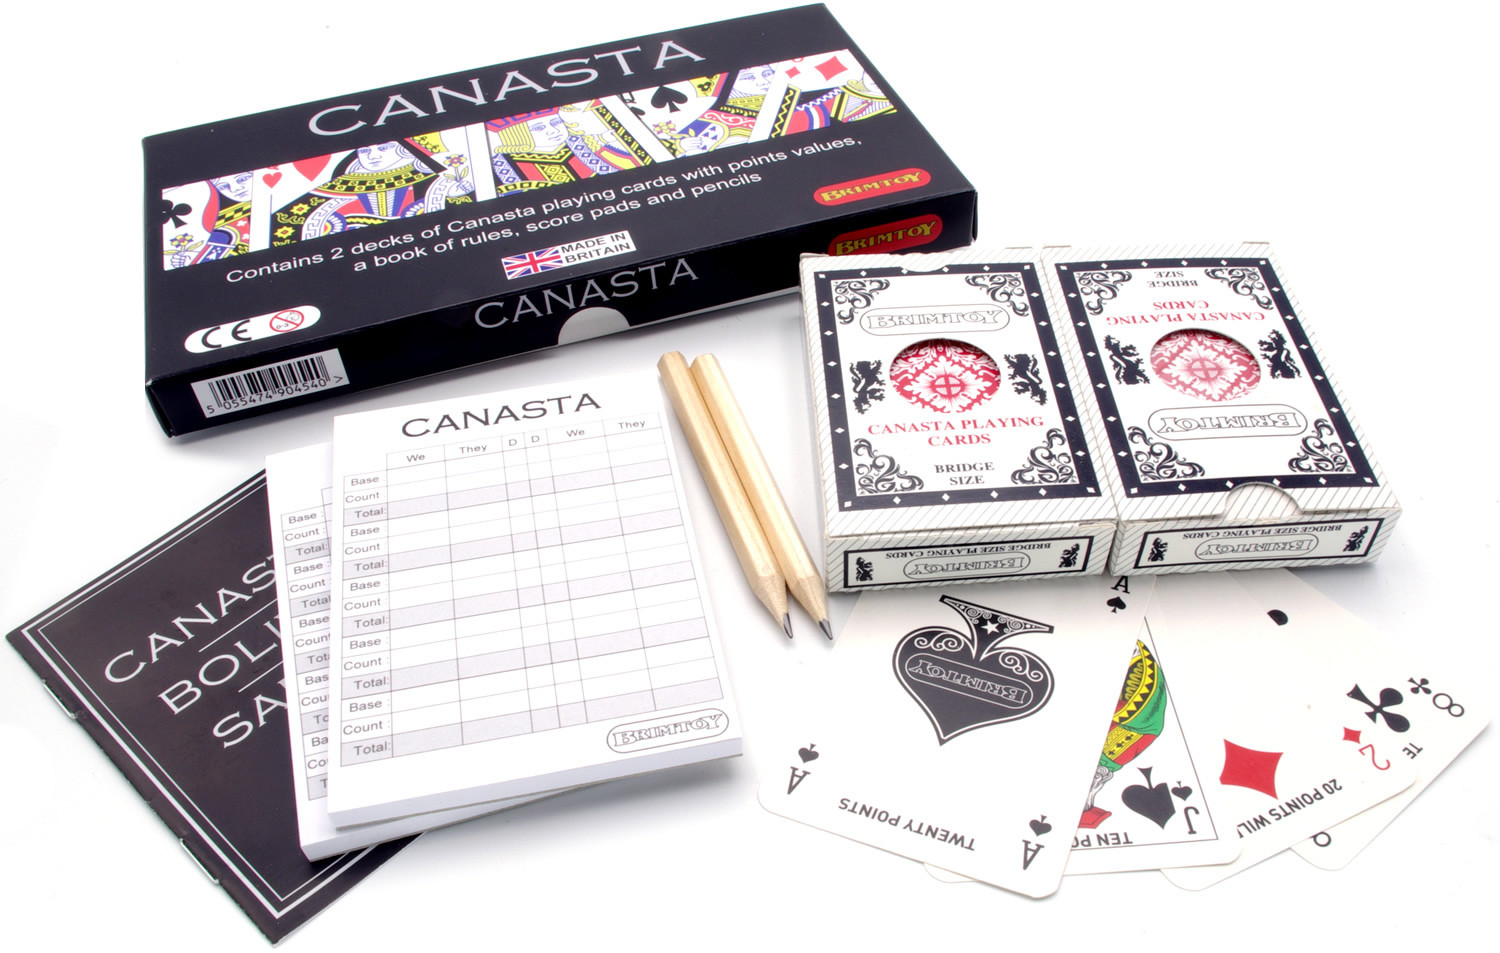 Canasta boxed card game